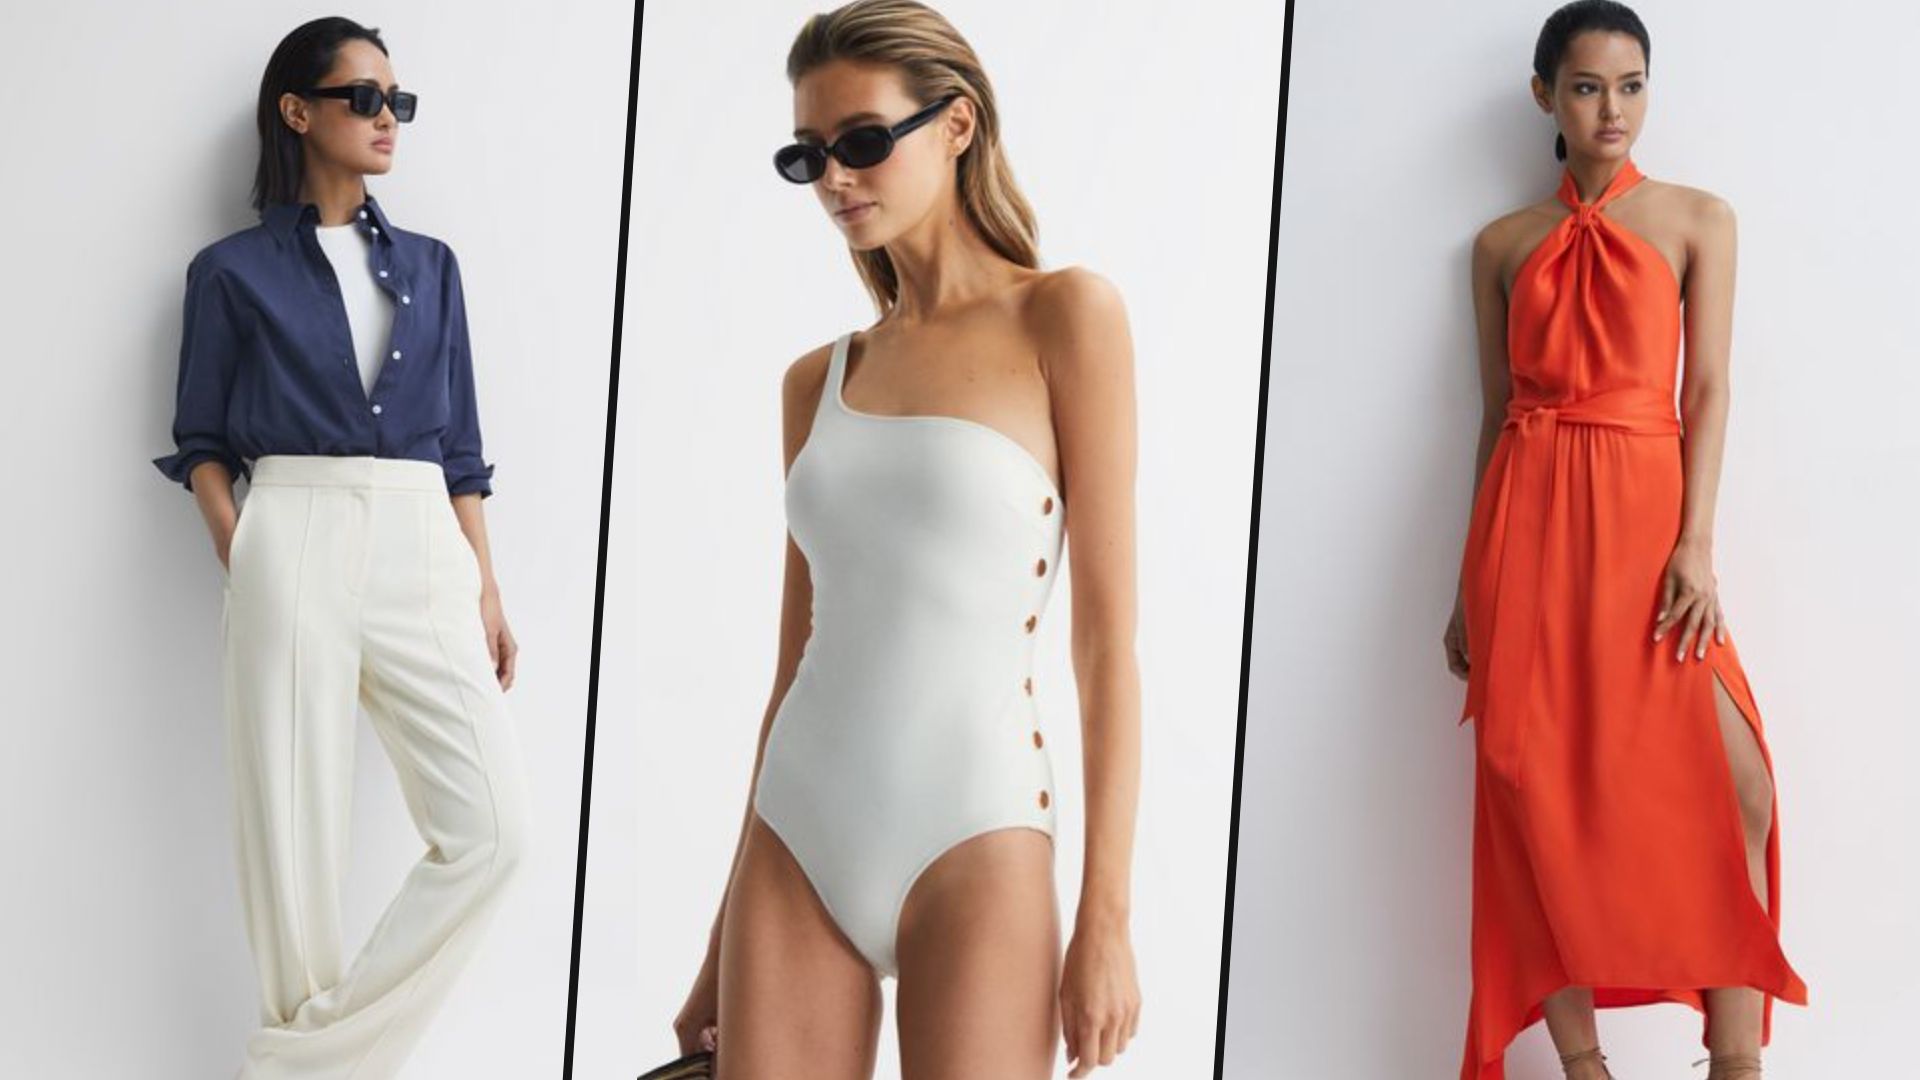 The Reiss Boxing Day sale has so many summer fashion options for